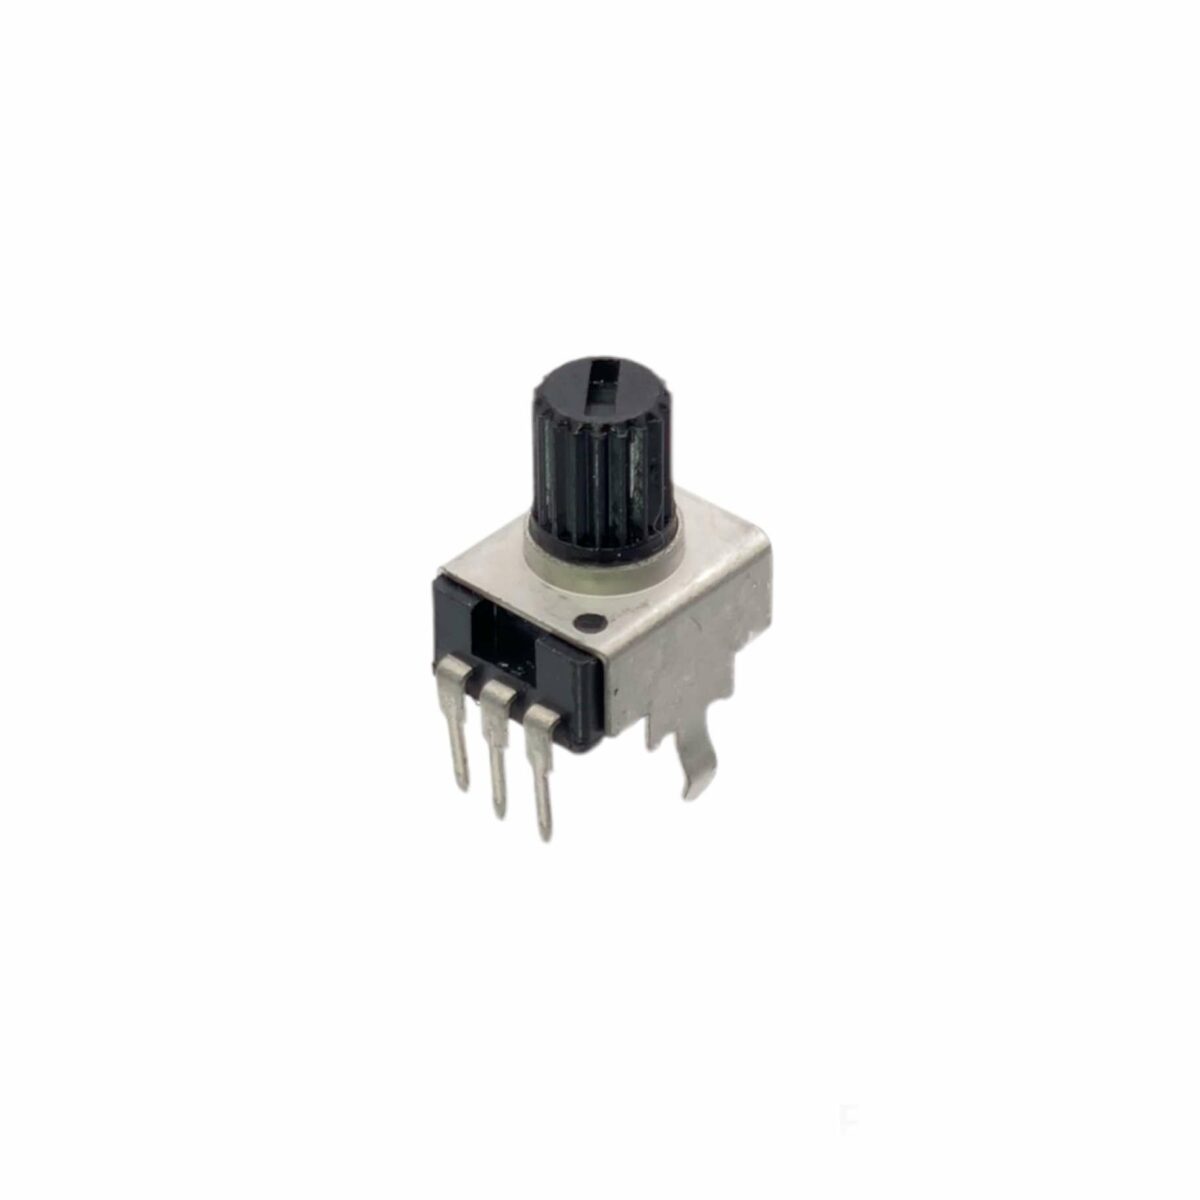 Photo of Behringer B2031A Input Trim Potentiometer Replacement at Analog Classics